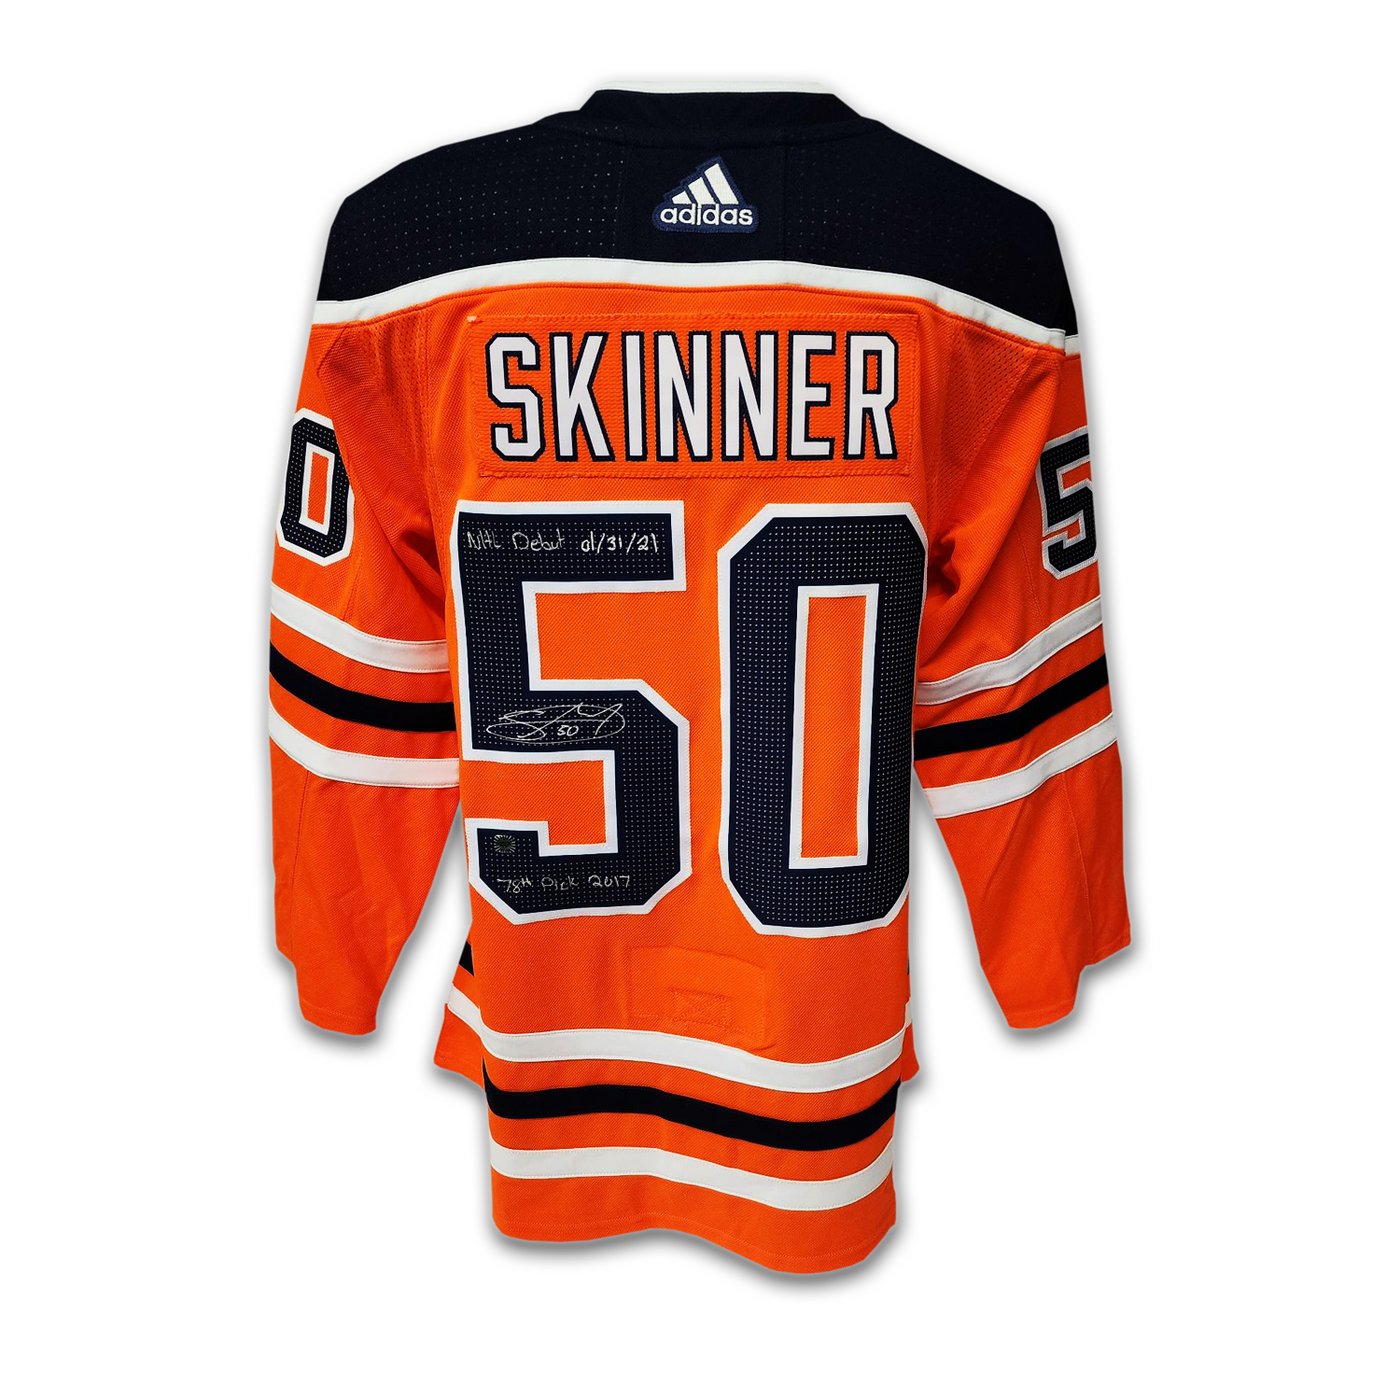 Stuart Skinner Autographed Edmonton Oilers Home Adidas Jersey Inscribed NHL Debut and 78th Pick